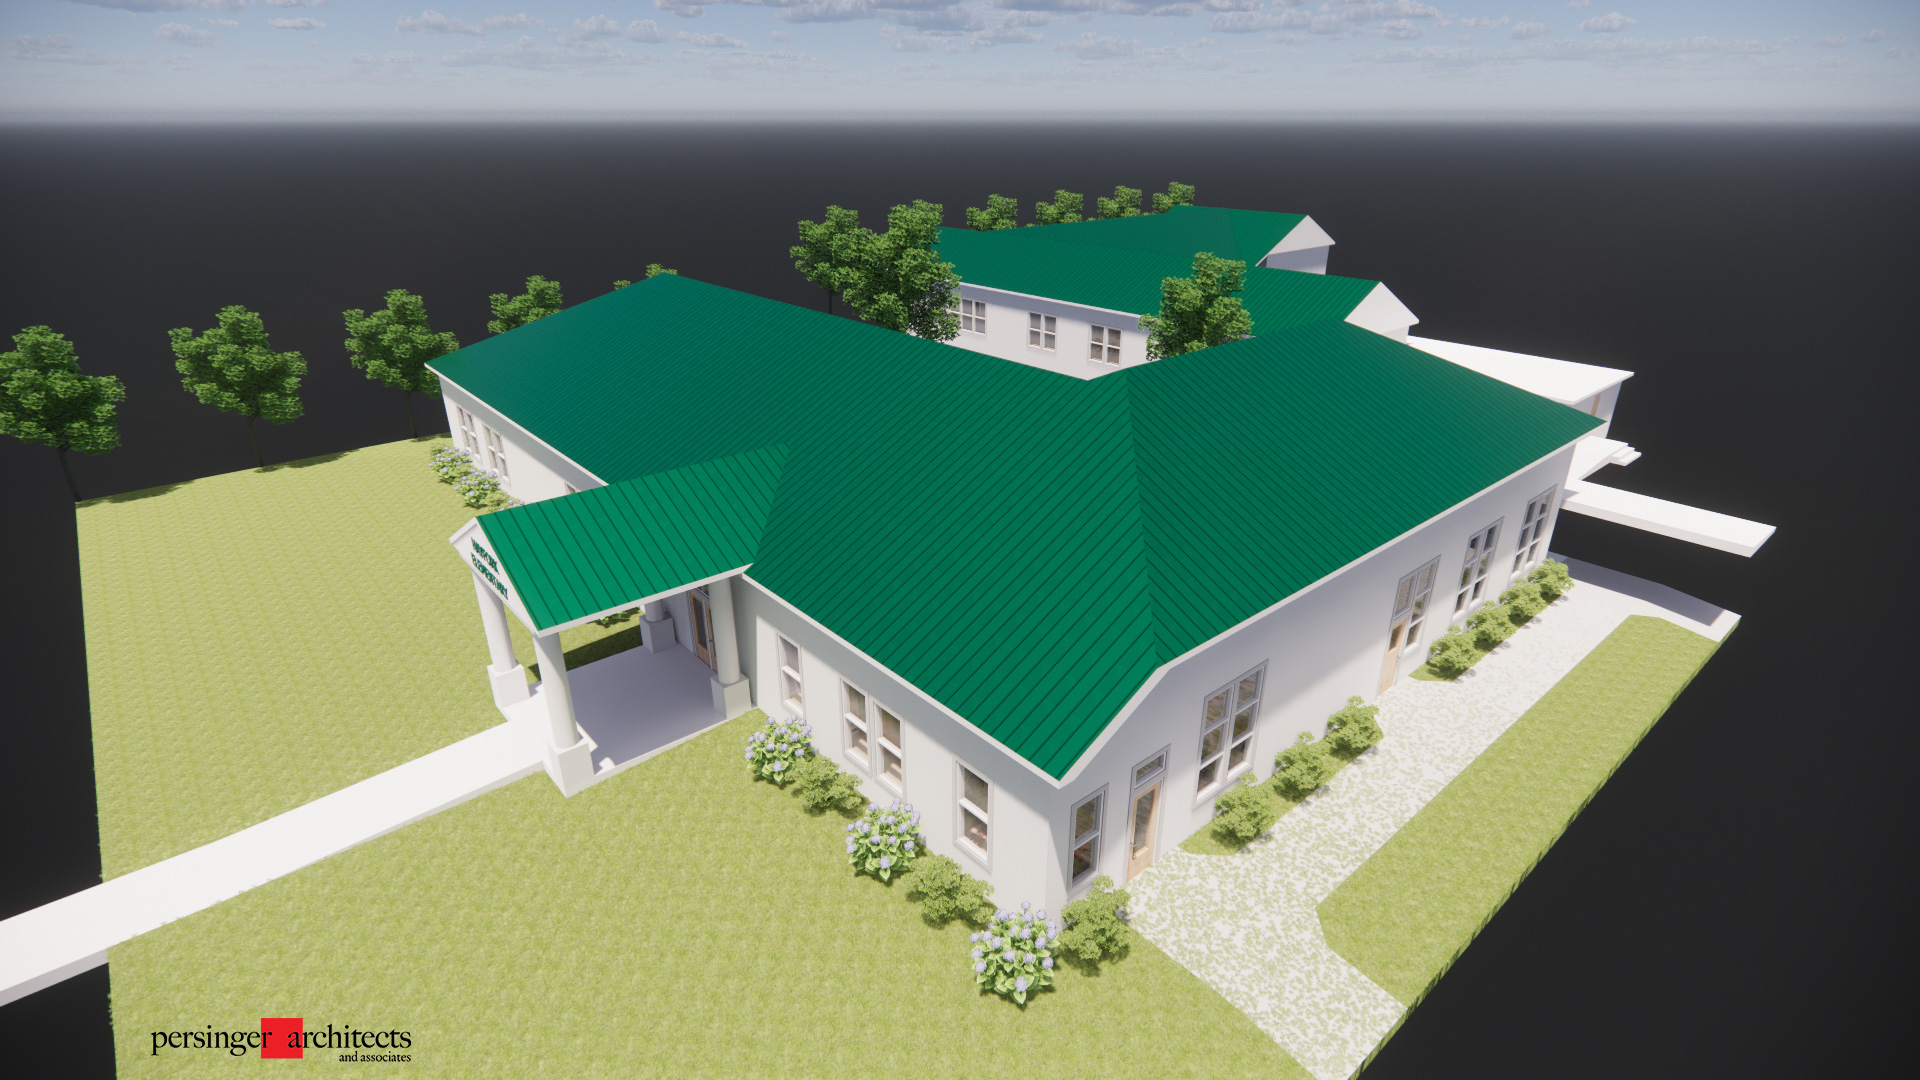 Rendering of classroom wing overhead, showing green roof over white walls.